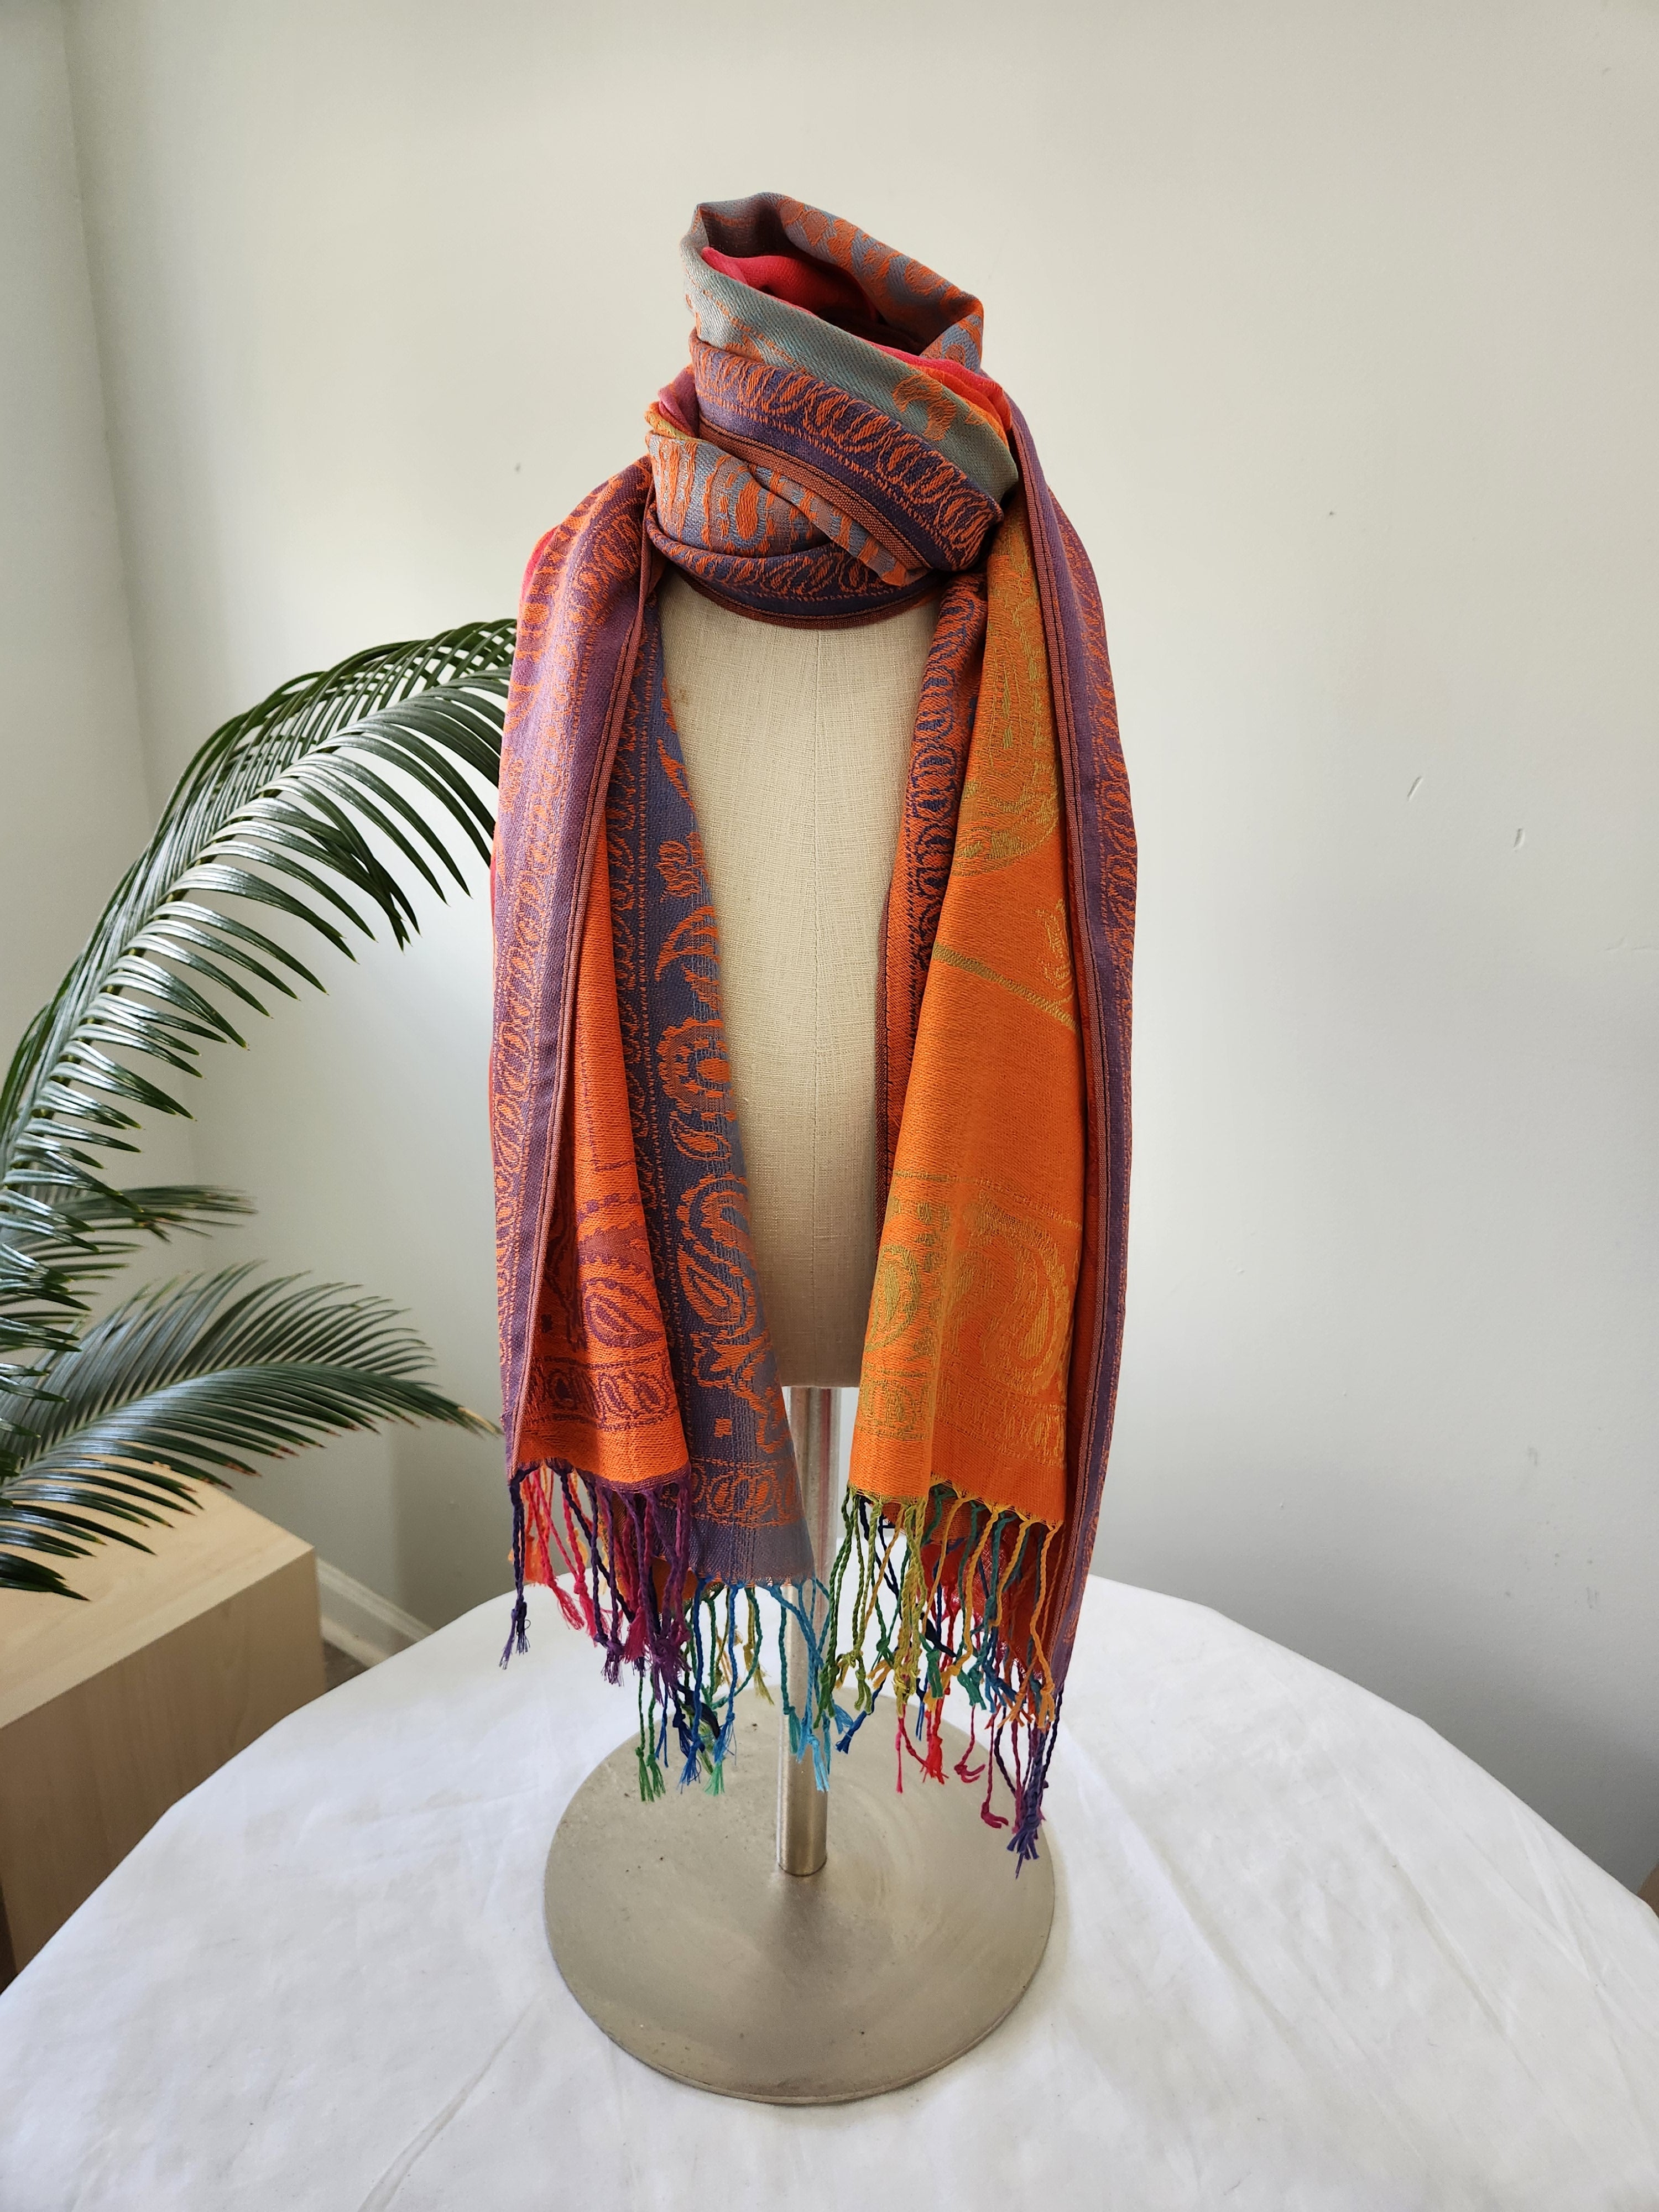 Women's Elegant Scarf or Wrap, Colorful Jewel-Tones, Great Gift for Holidays